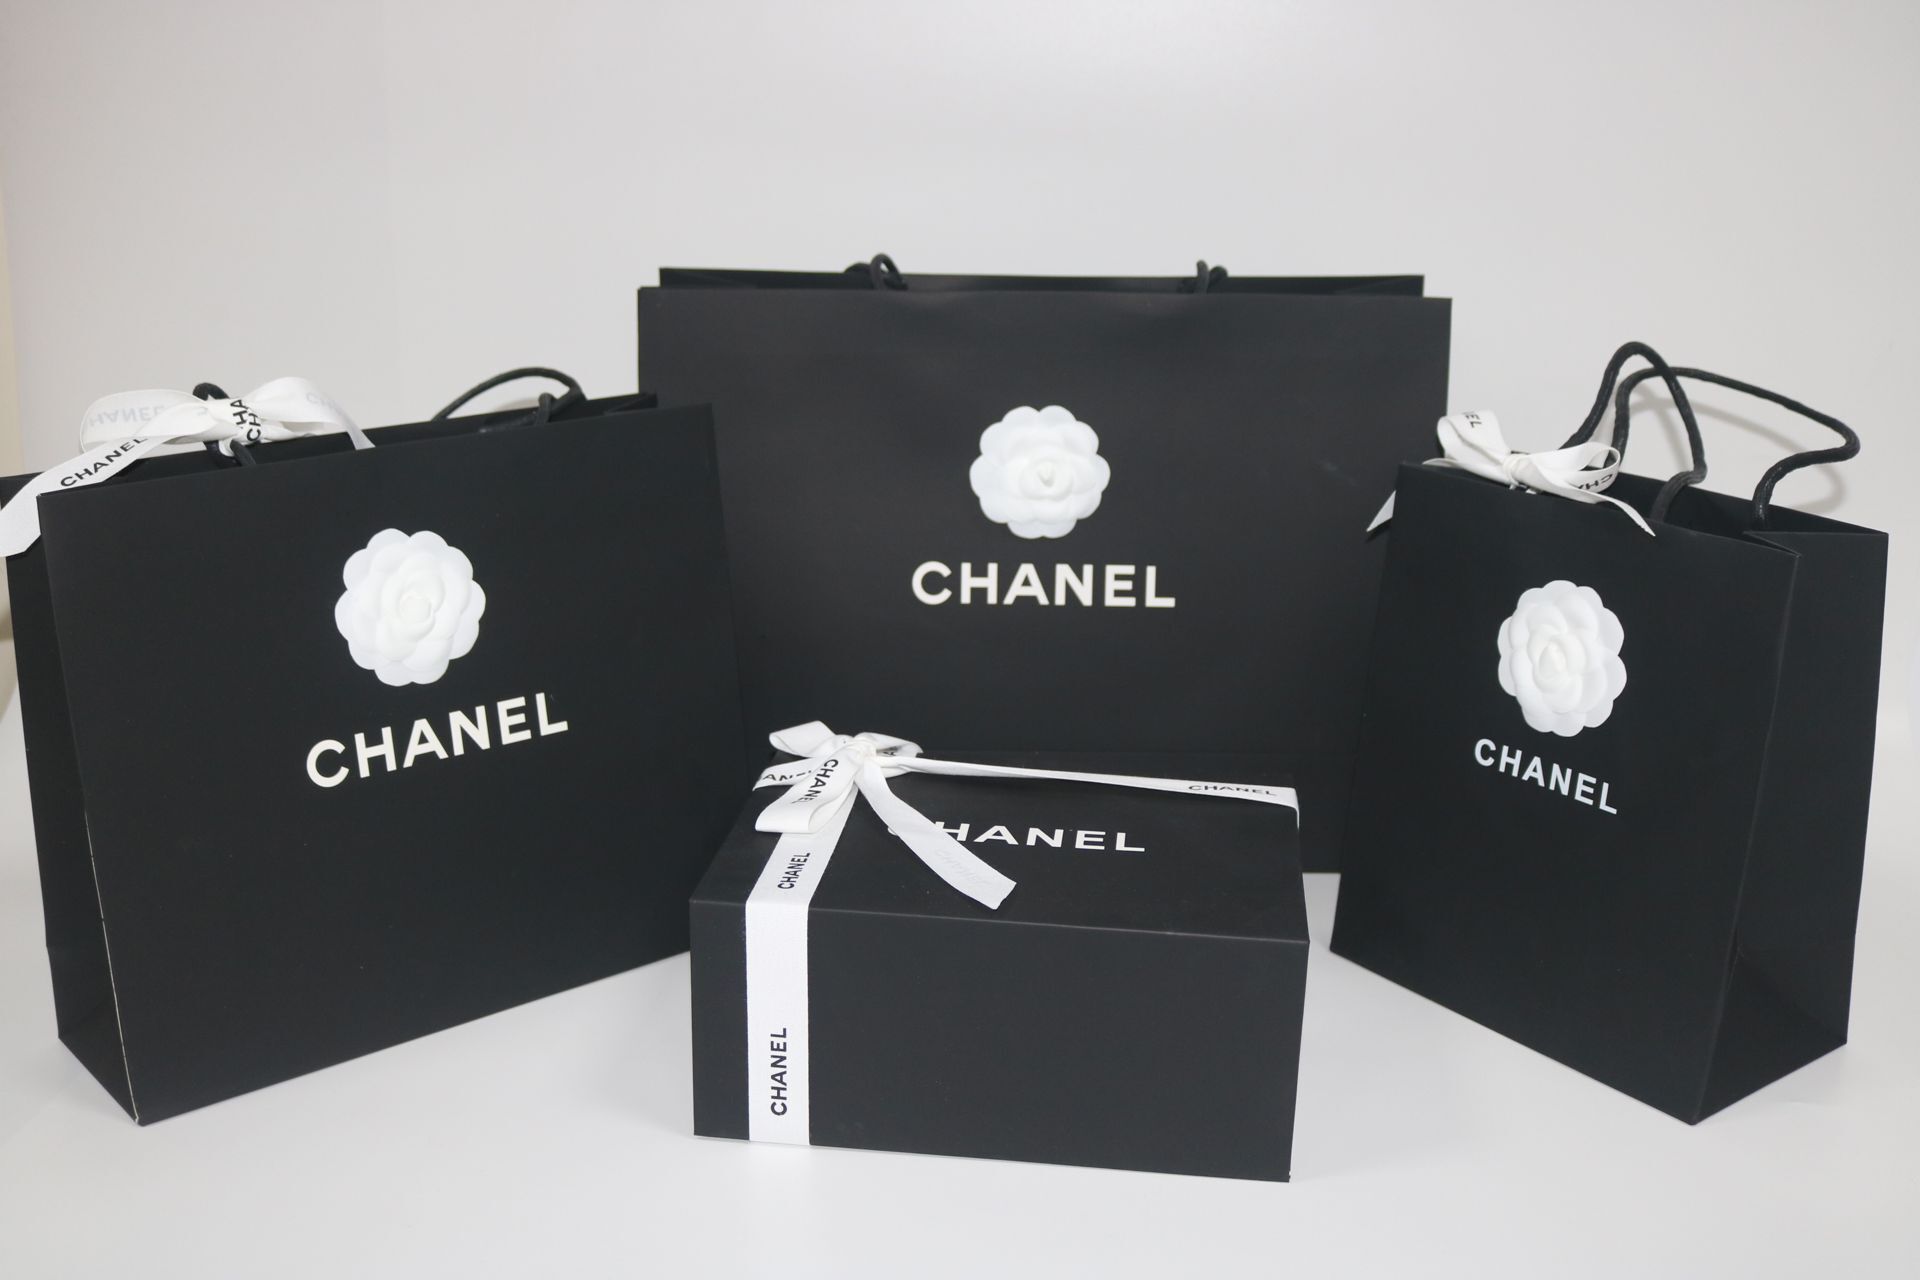 Genuine CHANEL paper bag perfume lipstick Chanel clothes packaging